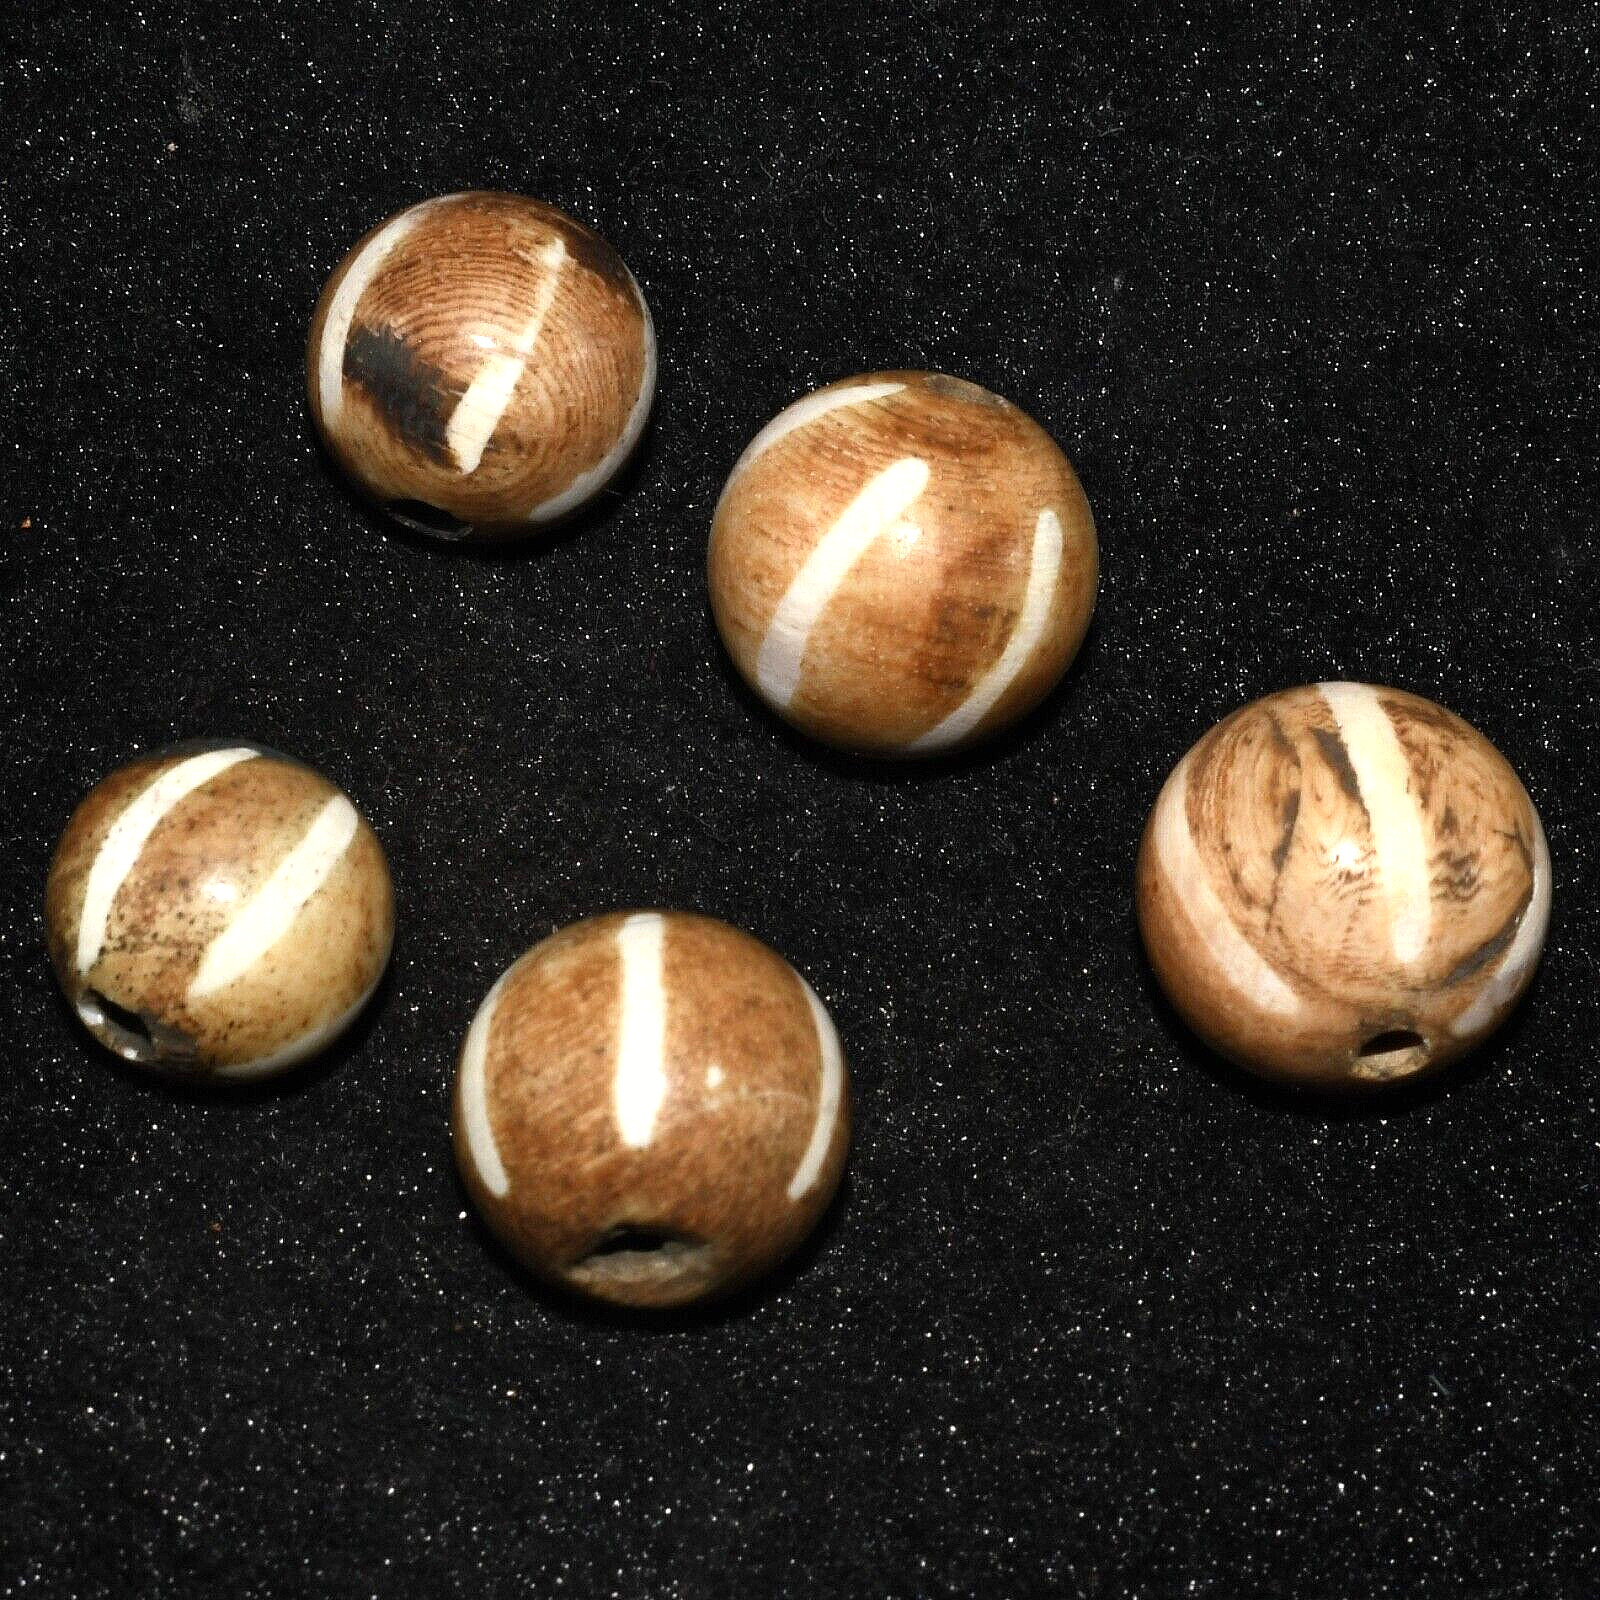 5 Genuine Pyu Culture Large Pumtek Beads with Stripes in Good Condition